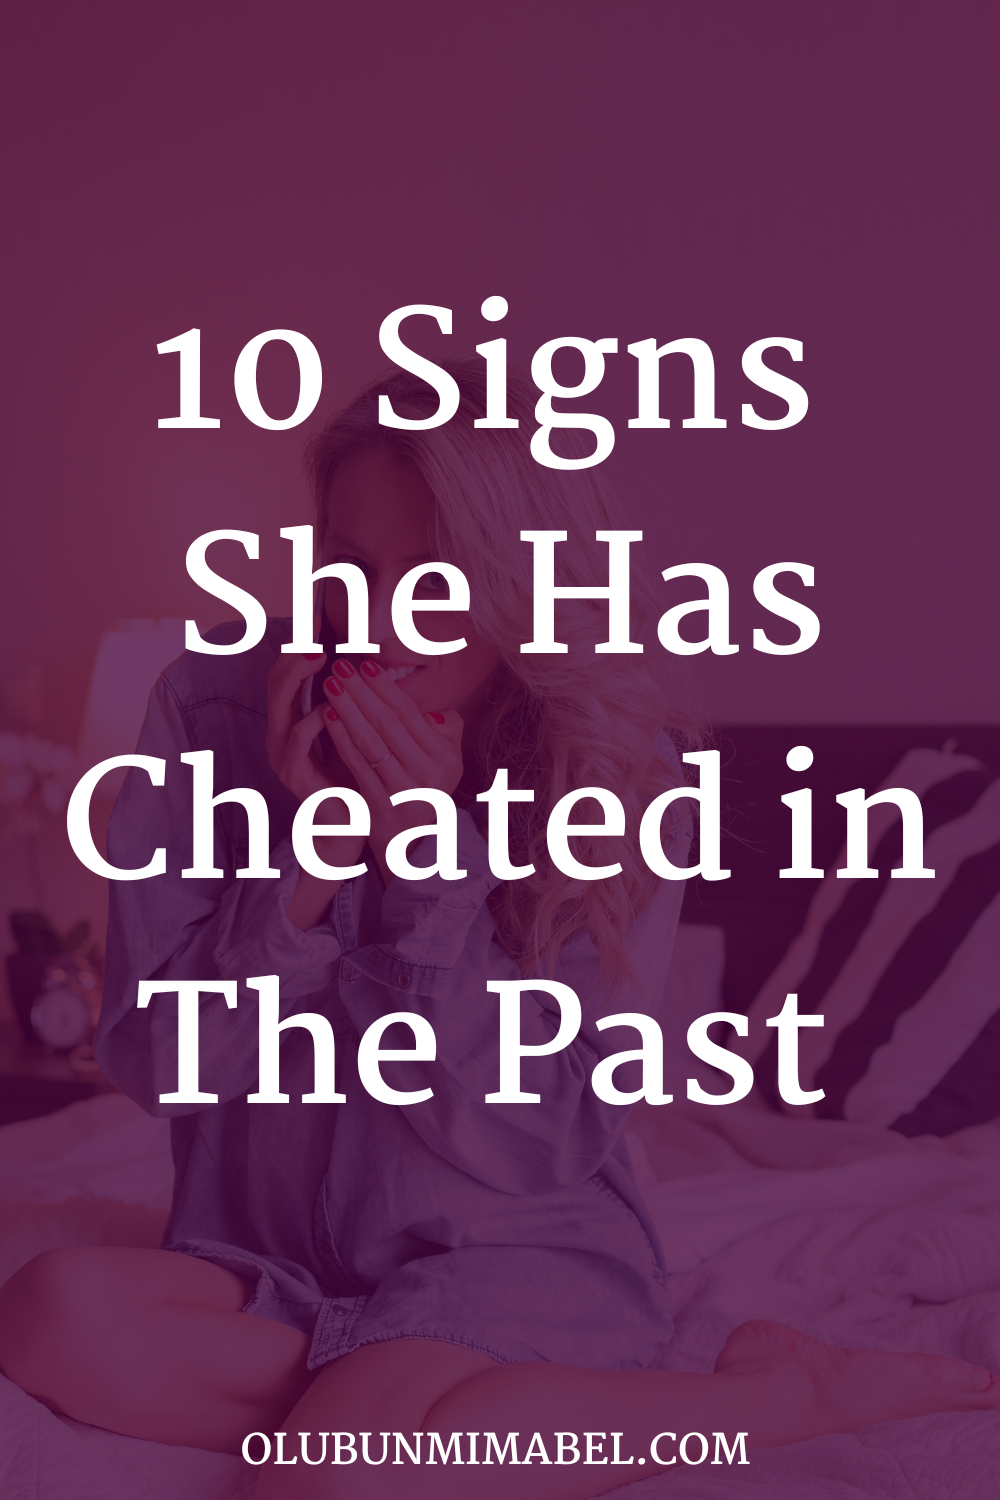 Signs She Cheated in The Past